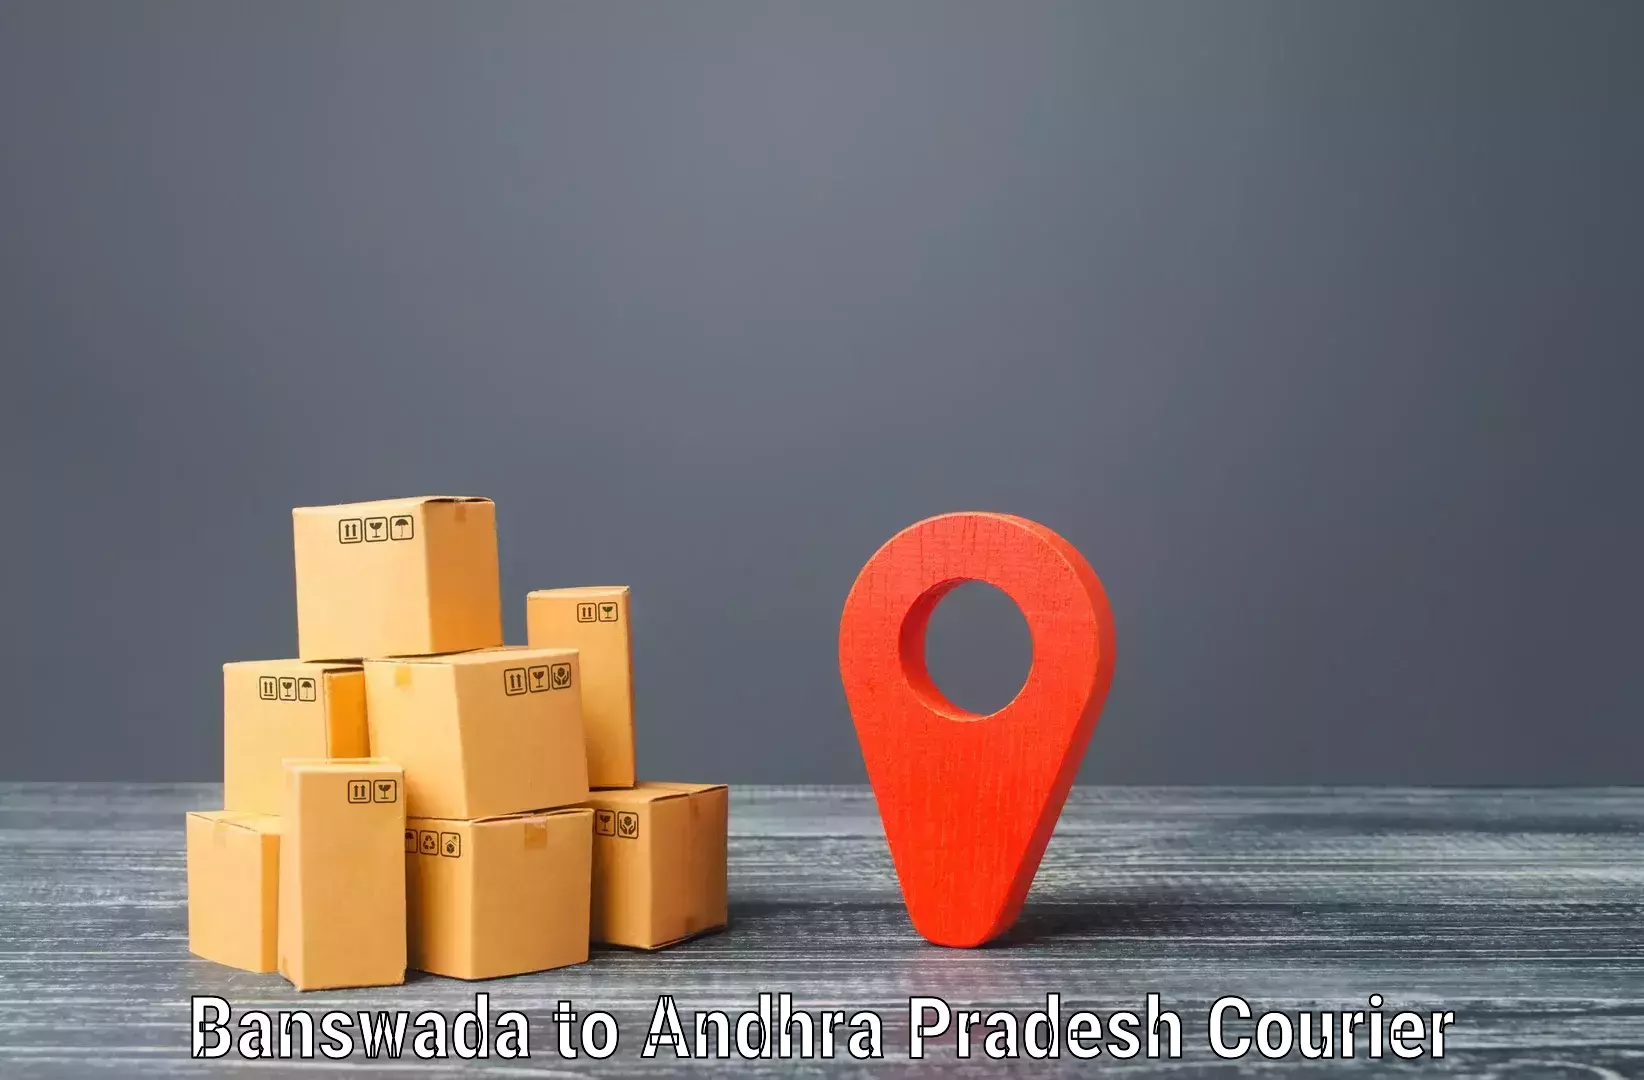 24-hour courier service in Banswada to Kambadur